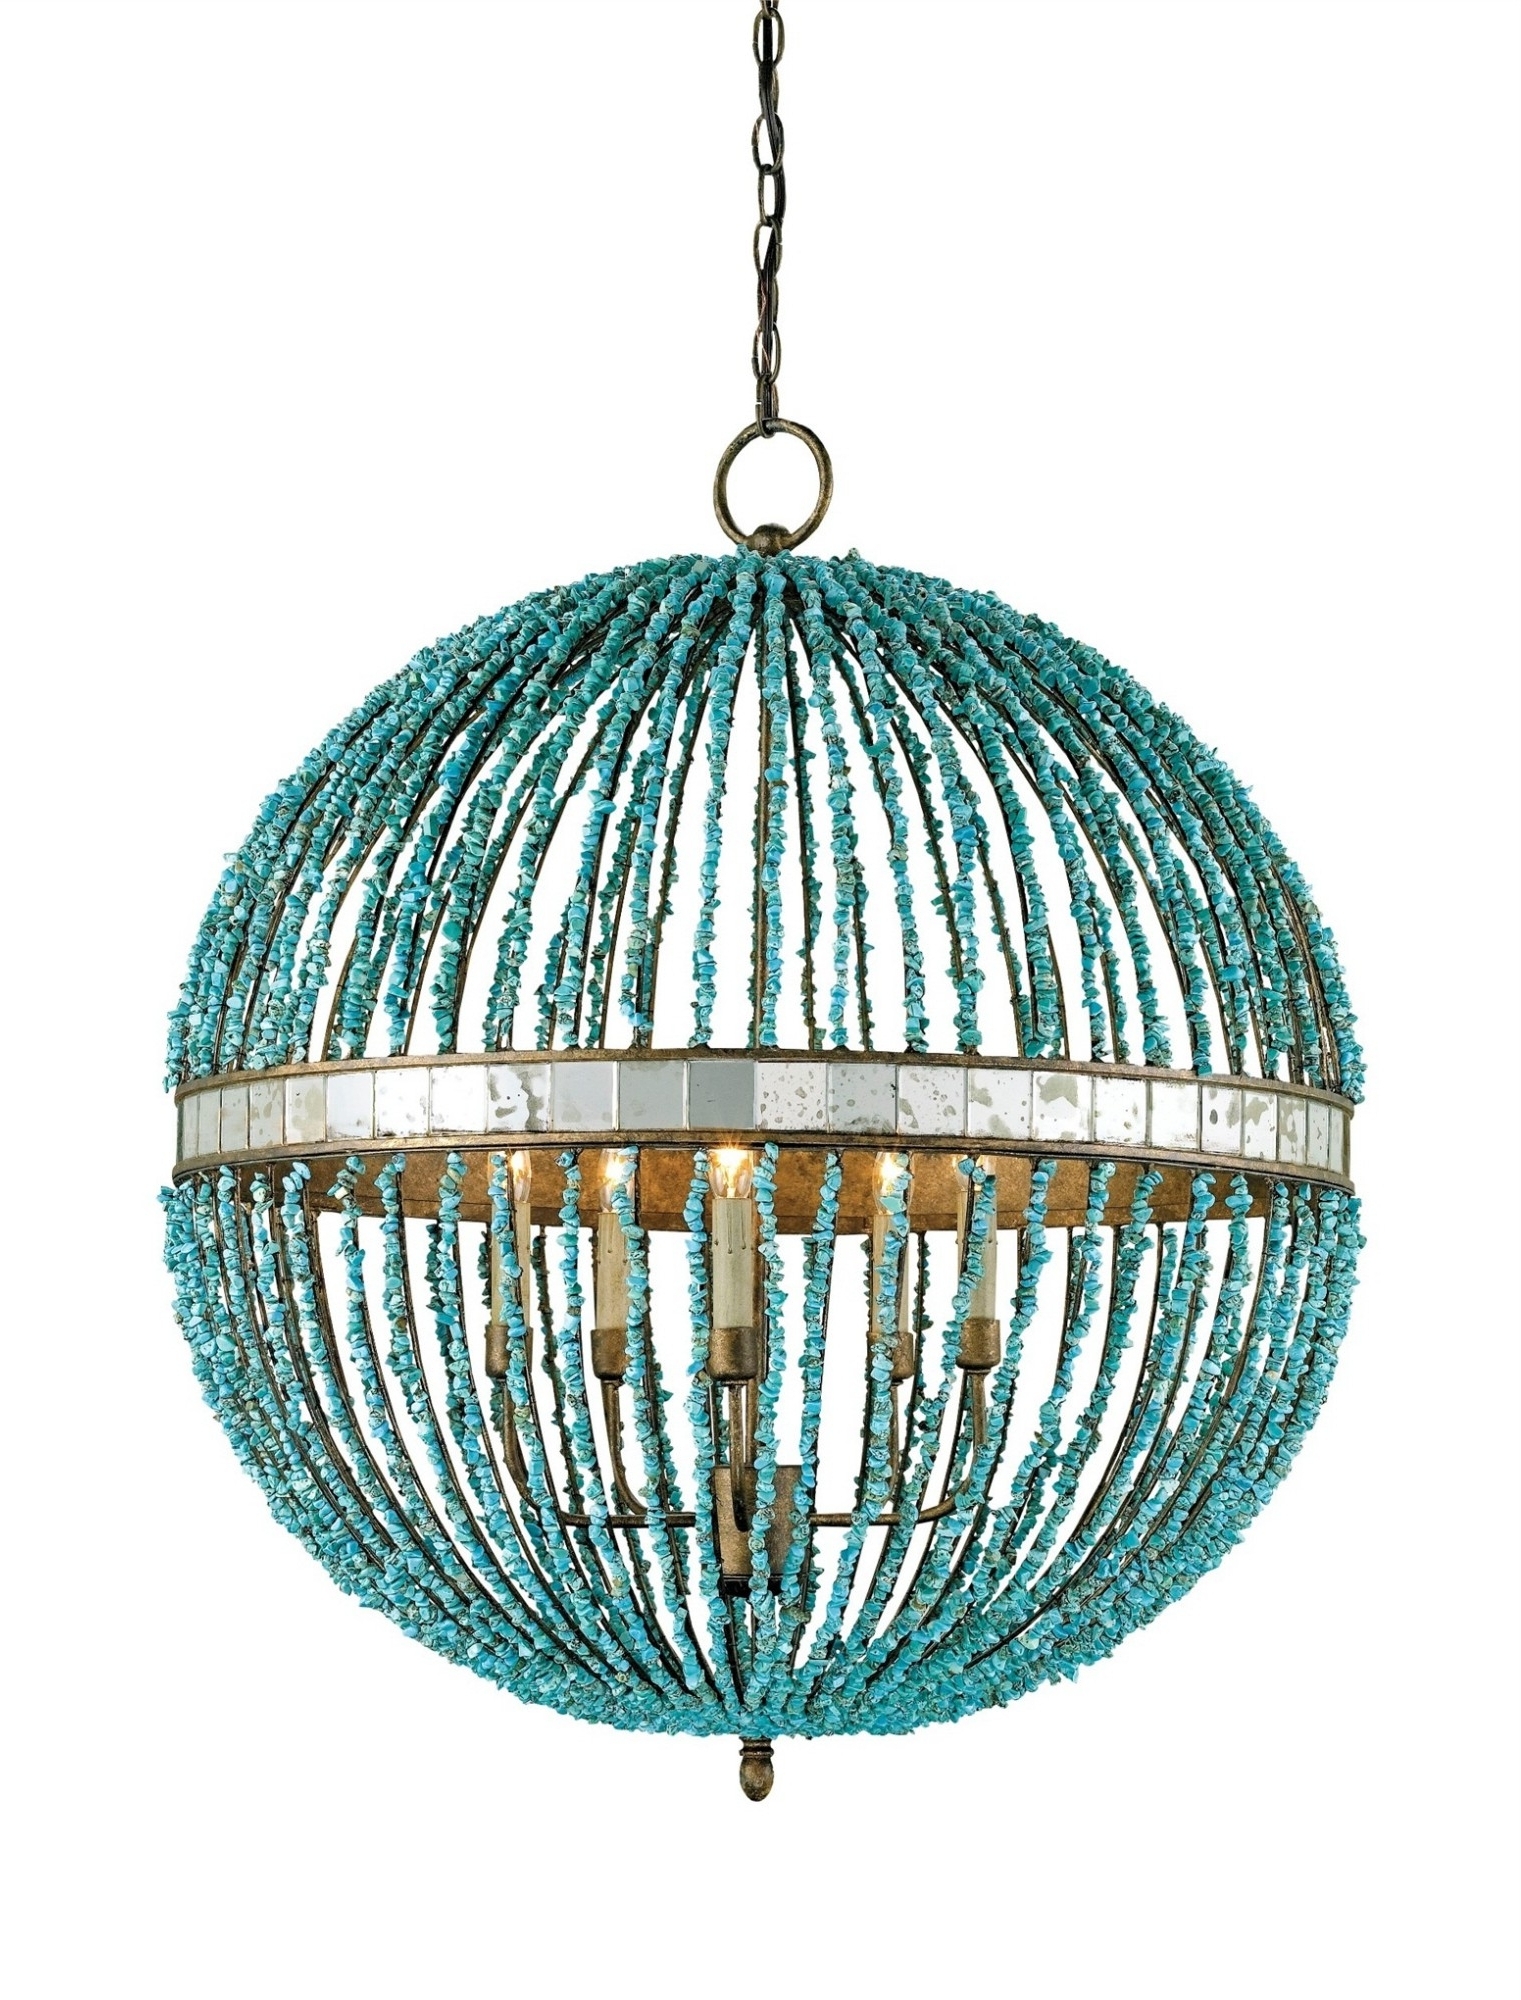 Turquoise Orb Chandeliers